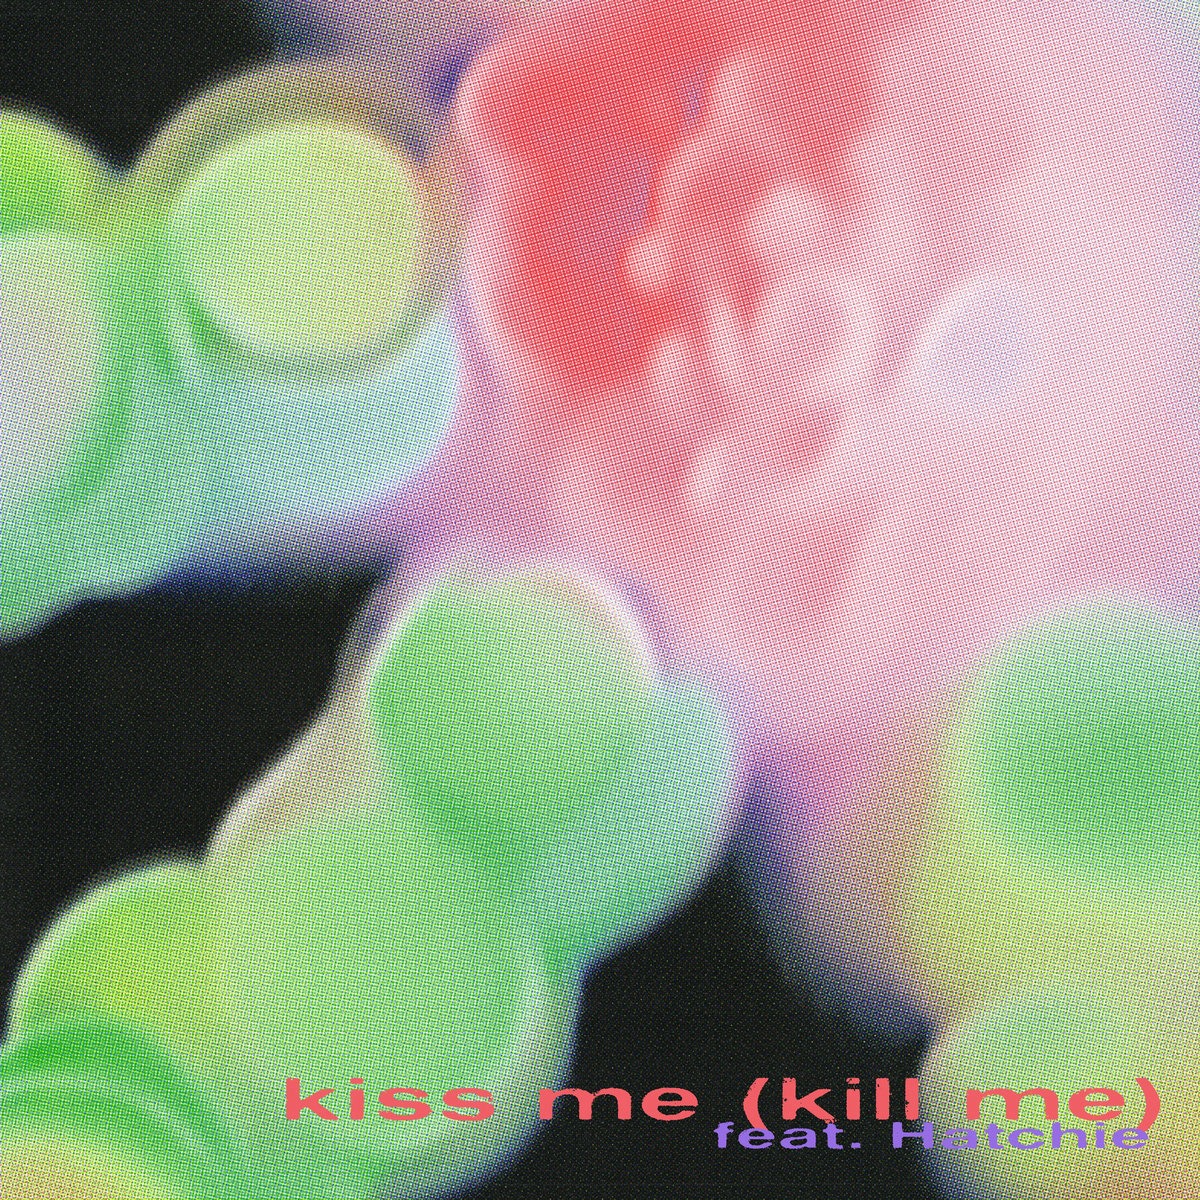 LISTEN: “Kiss Me (Kill Me)” by Rinse featuring Hatchie